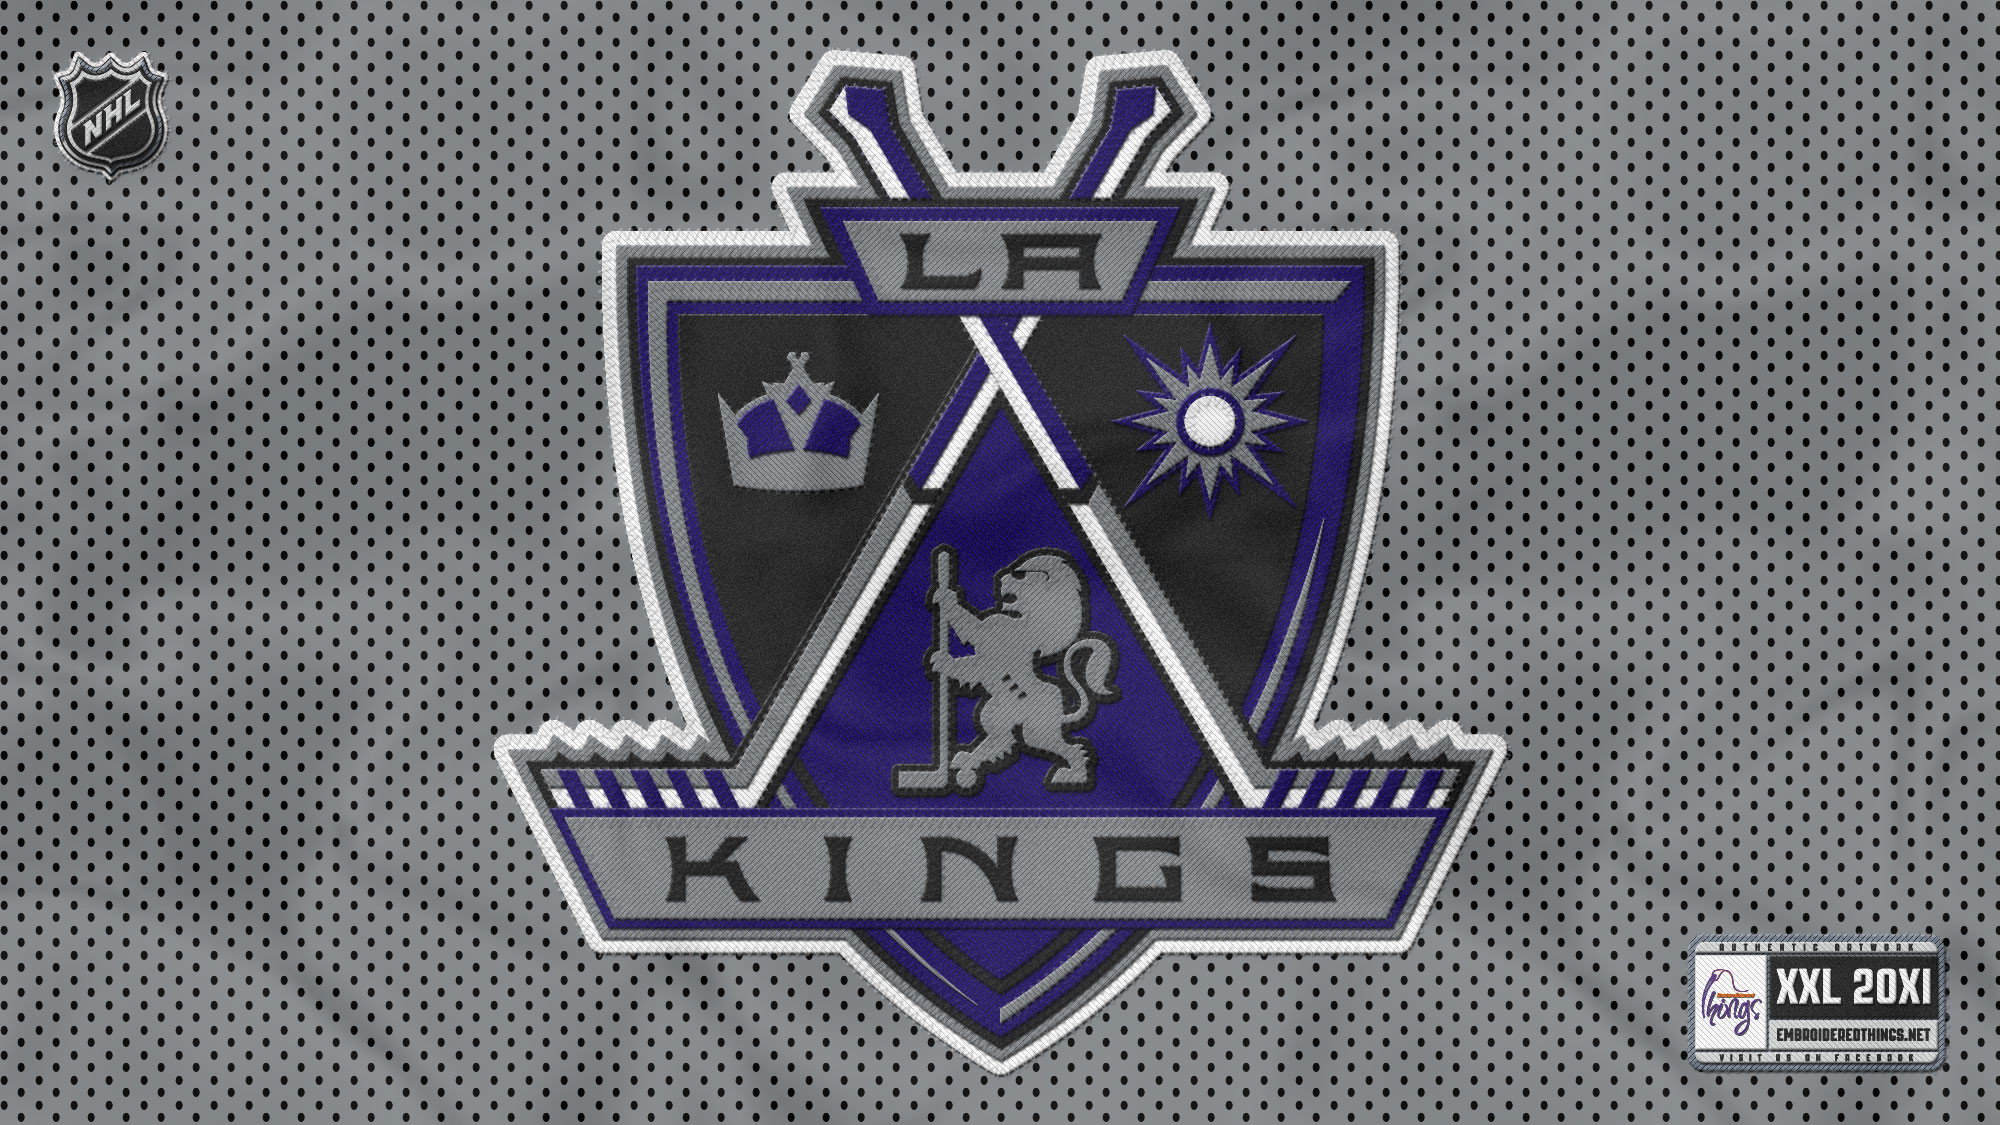 2000x1125 by Janella Connar Wallpaper for PC: LA Kings